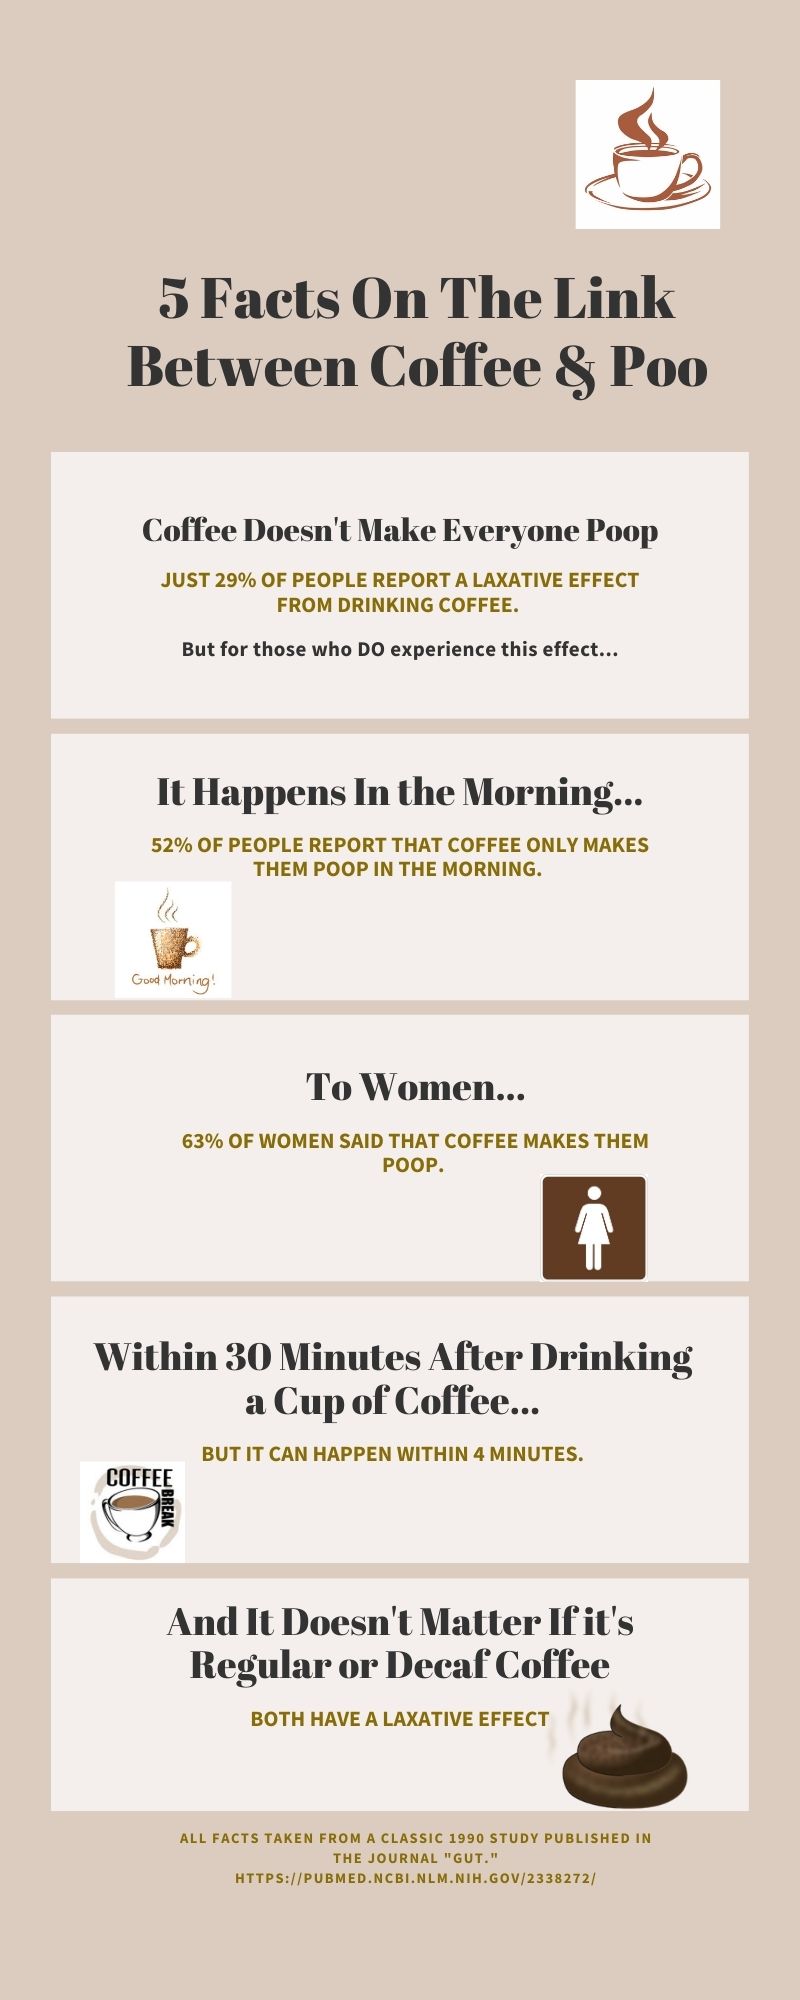 An infographic of facts and cartoon images illustrating the link between coffee and poo, with text described below. 